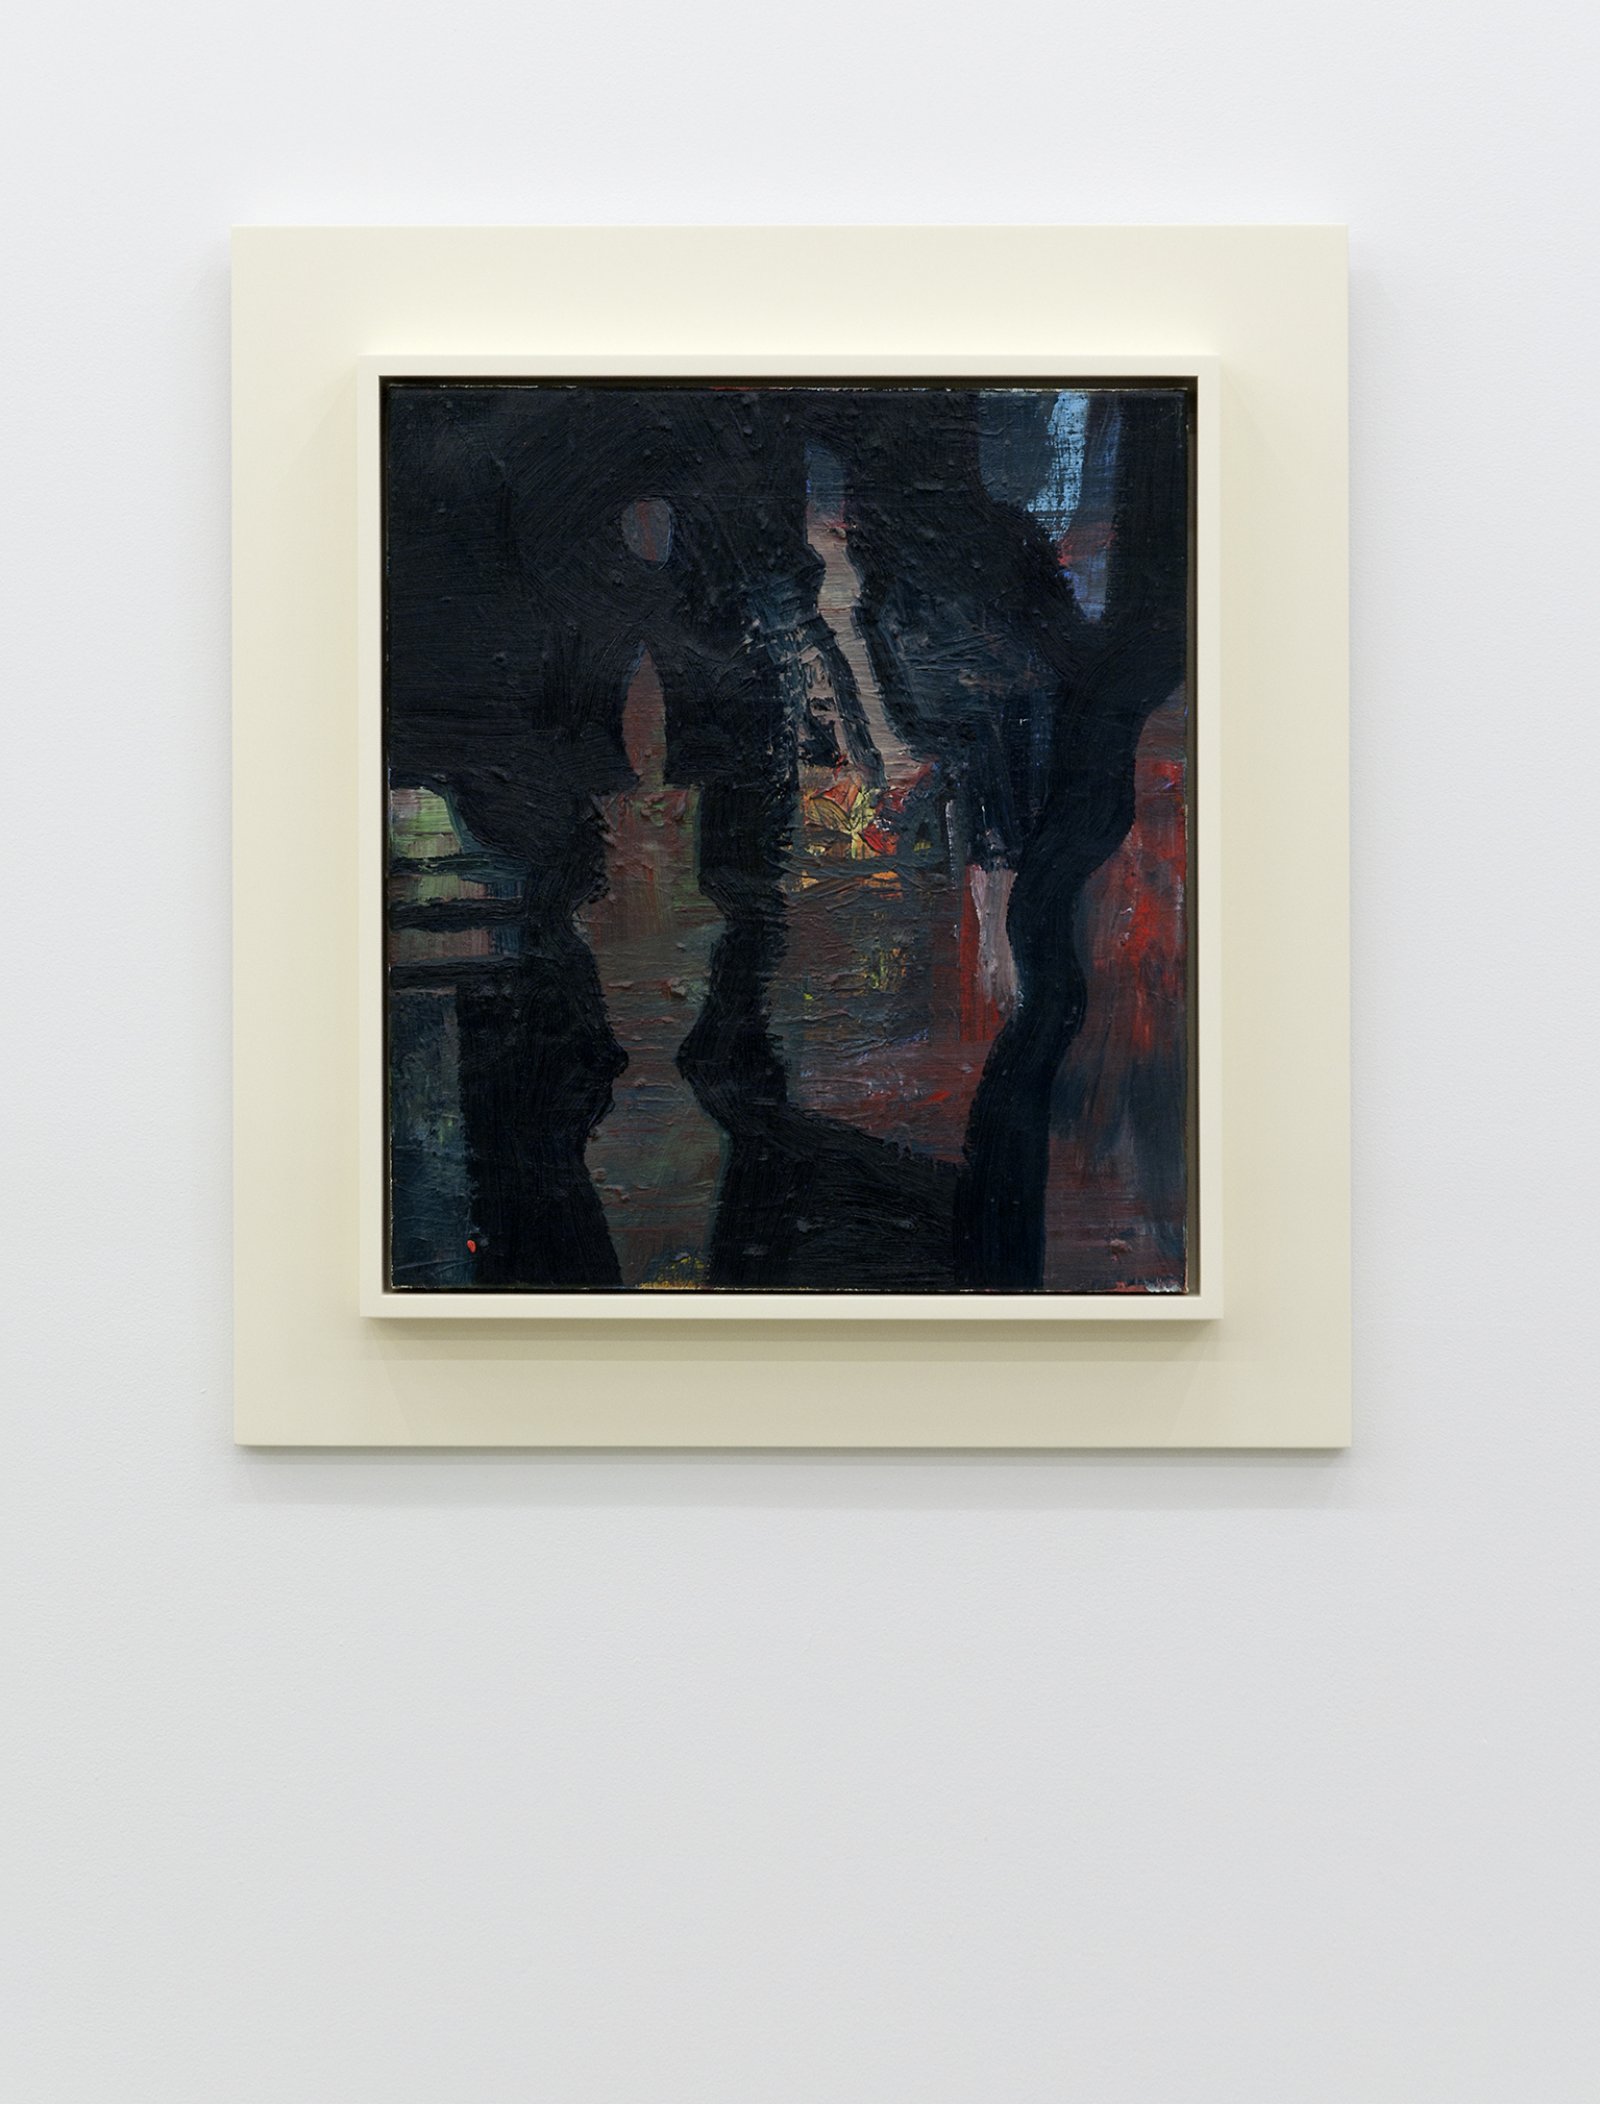 ​Damian Moppett, Candle at Night, 2009–2010, oil on linen and wood frame, 28 x 26 in. (70 x 65 cm)  ​ by Damian Moppett